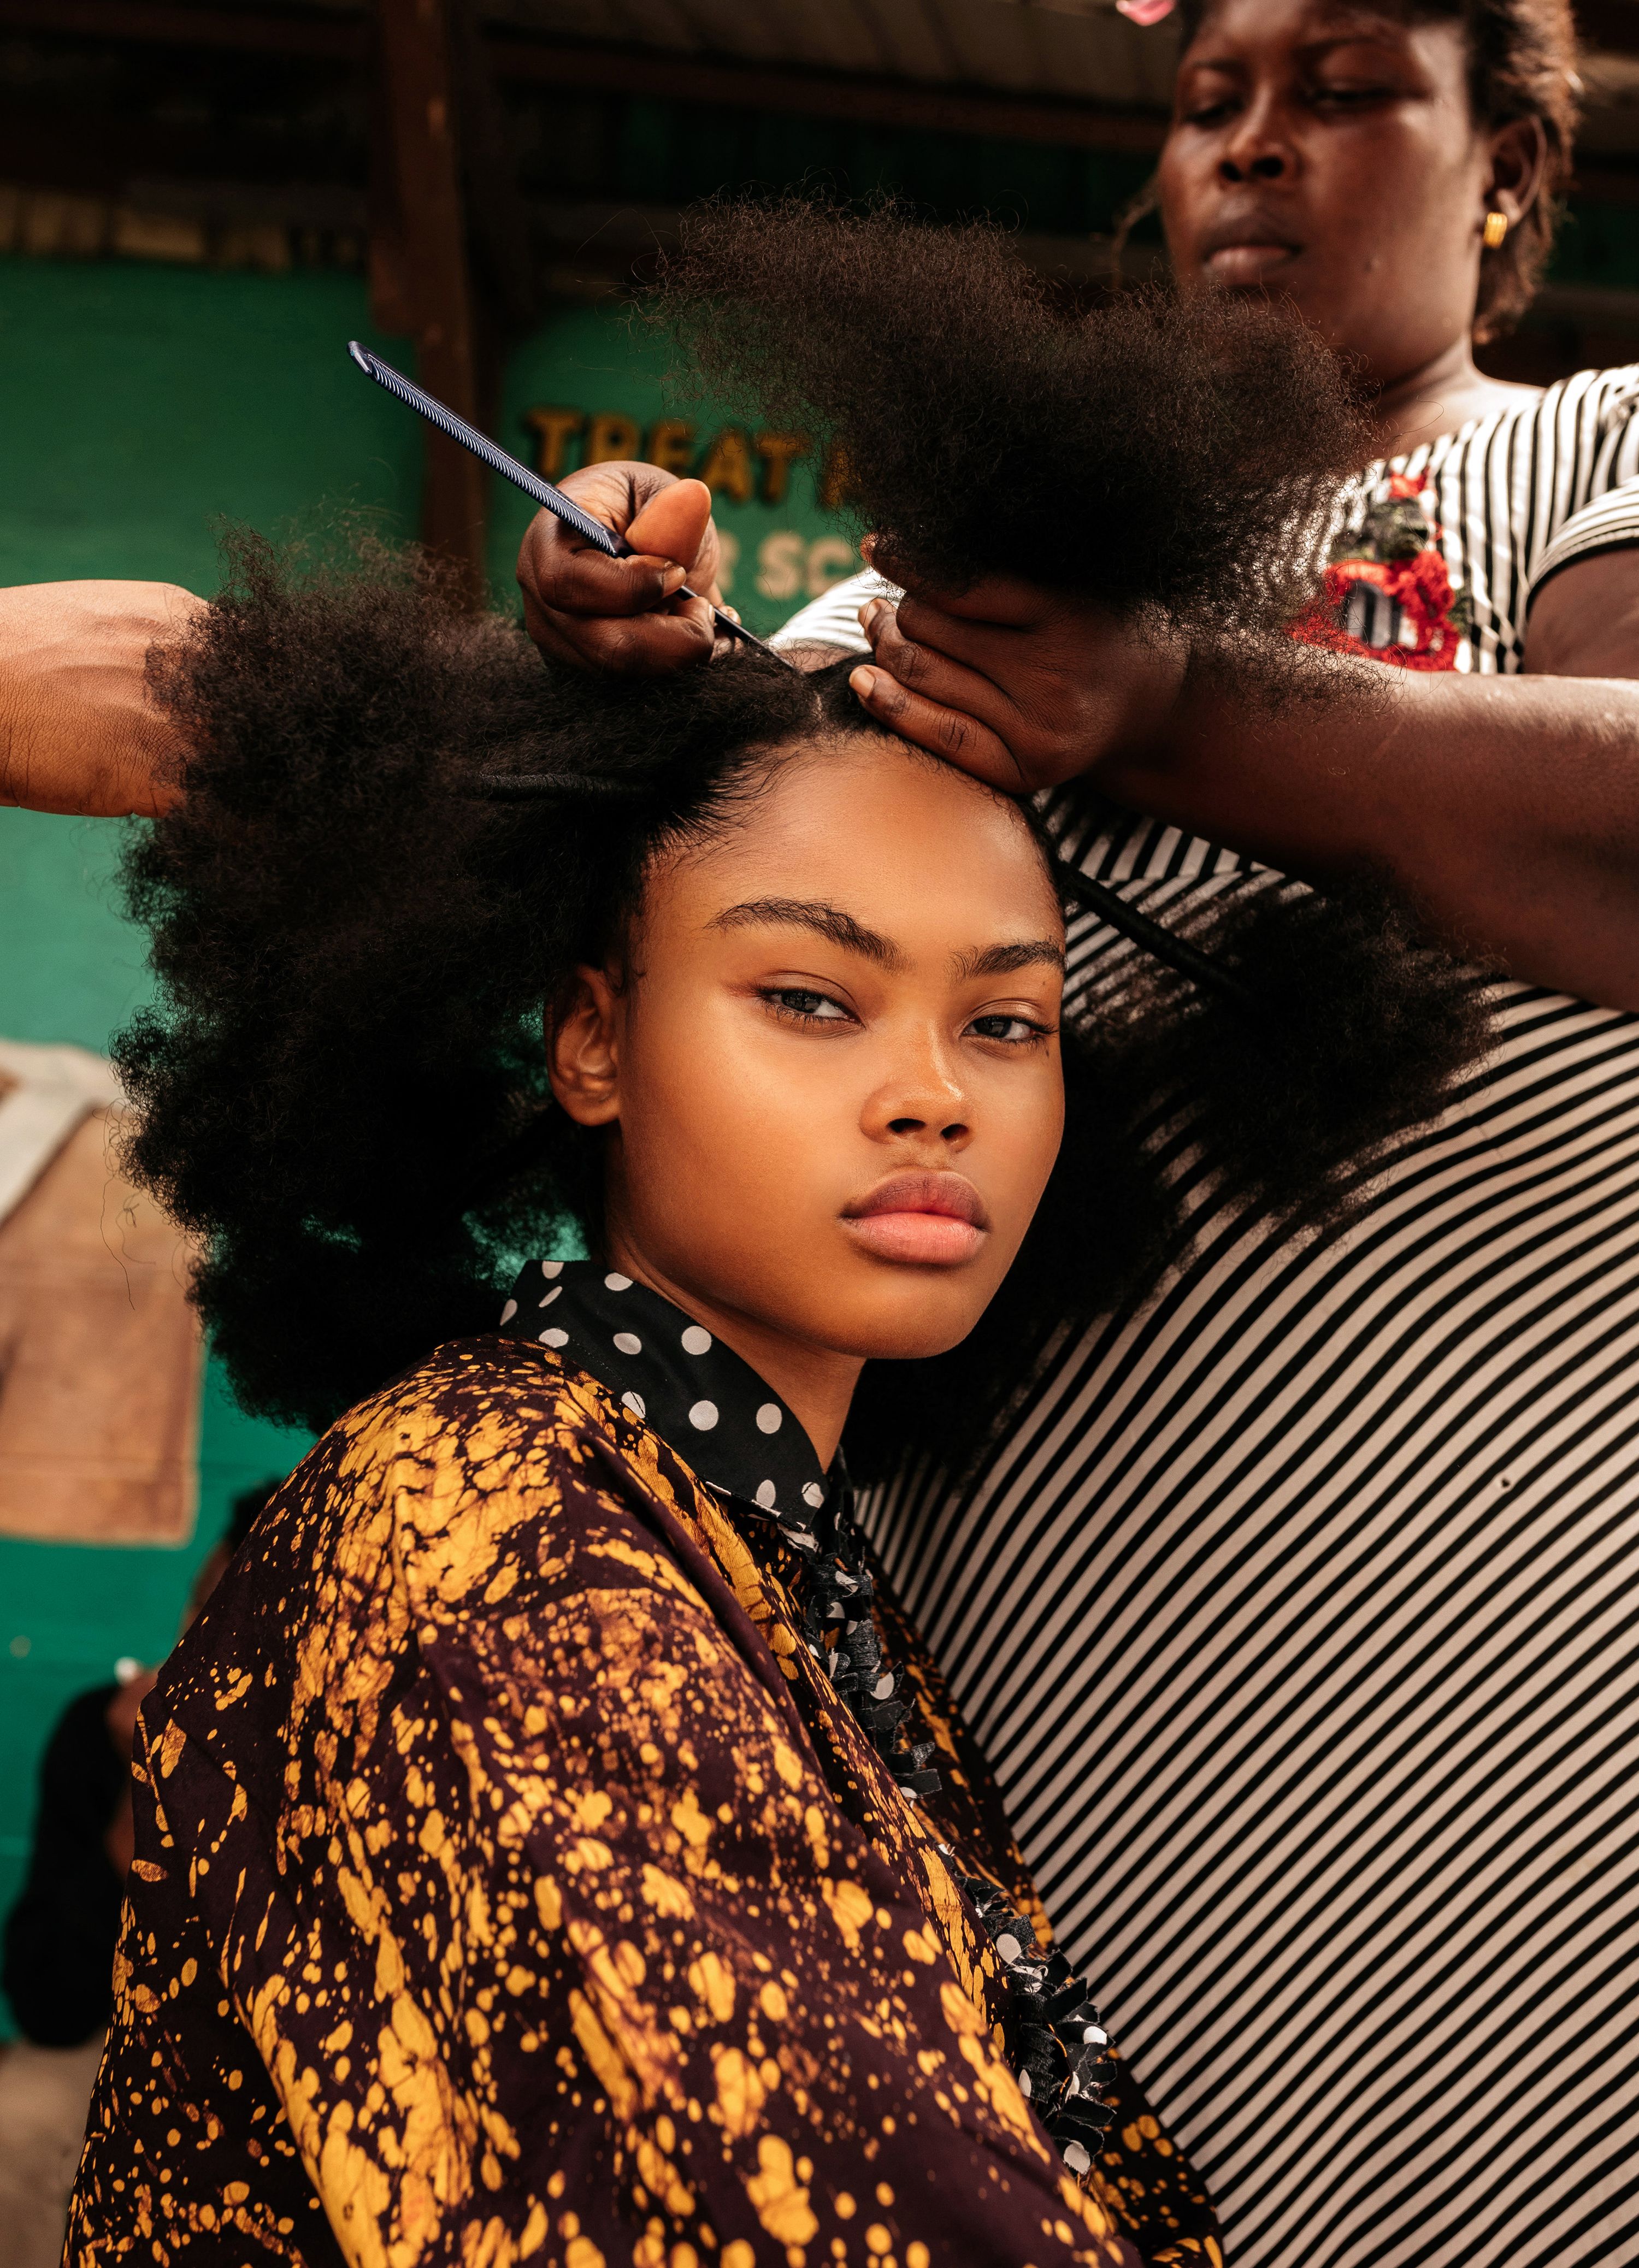 Photo series shows why African hair braiding is about more than